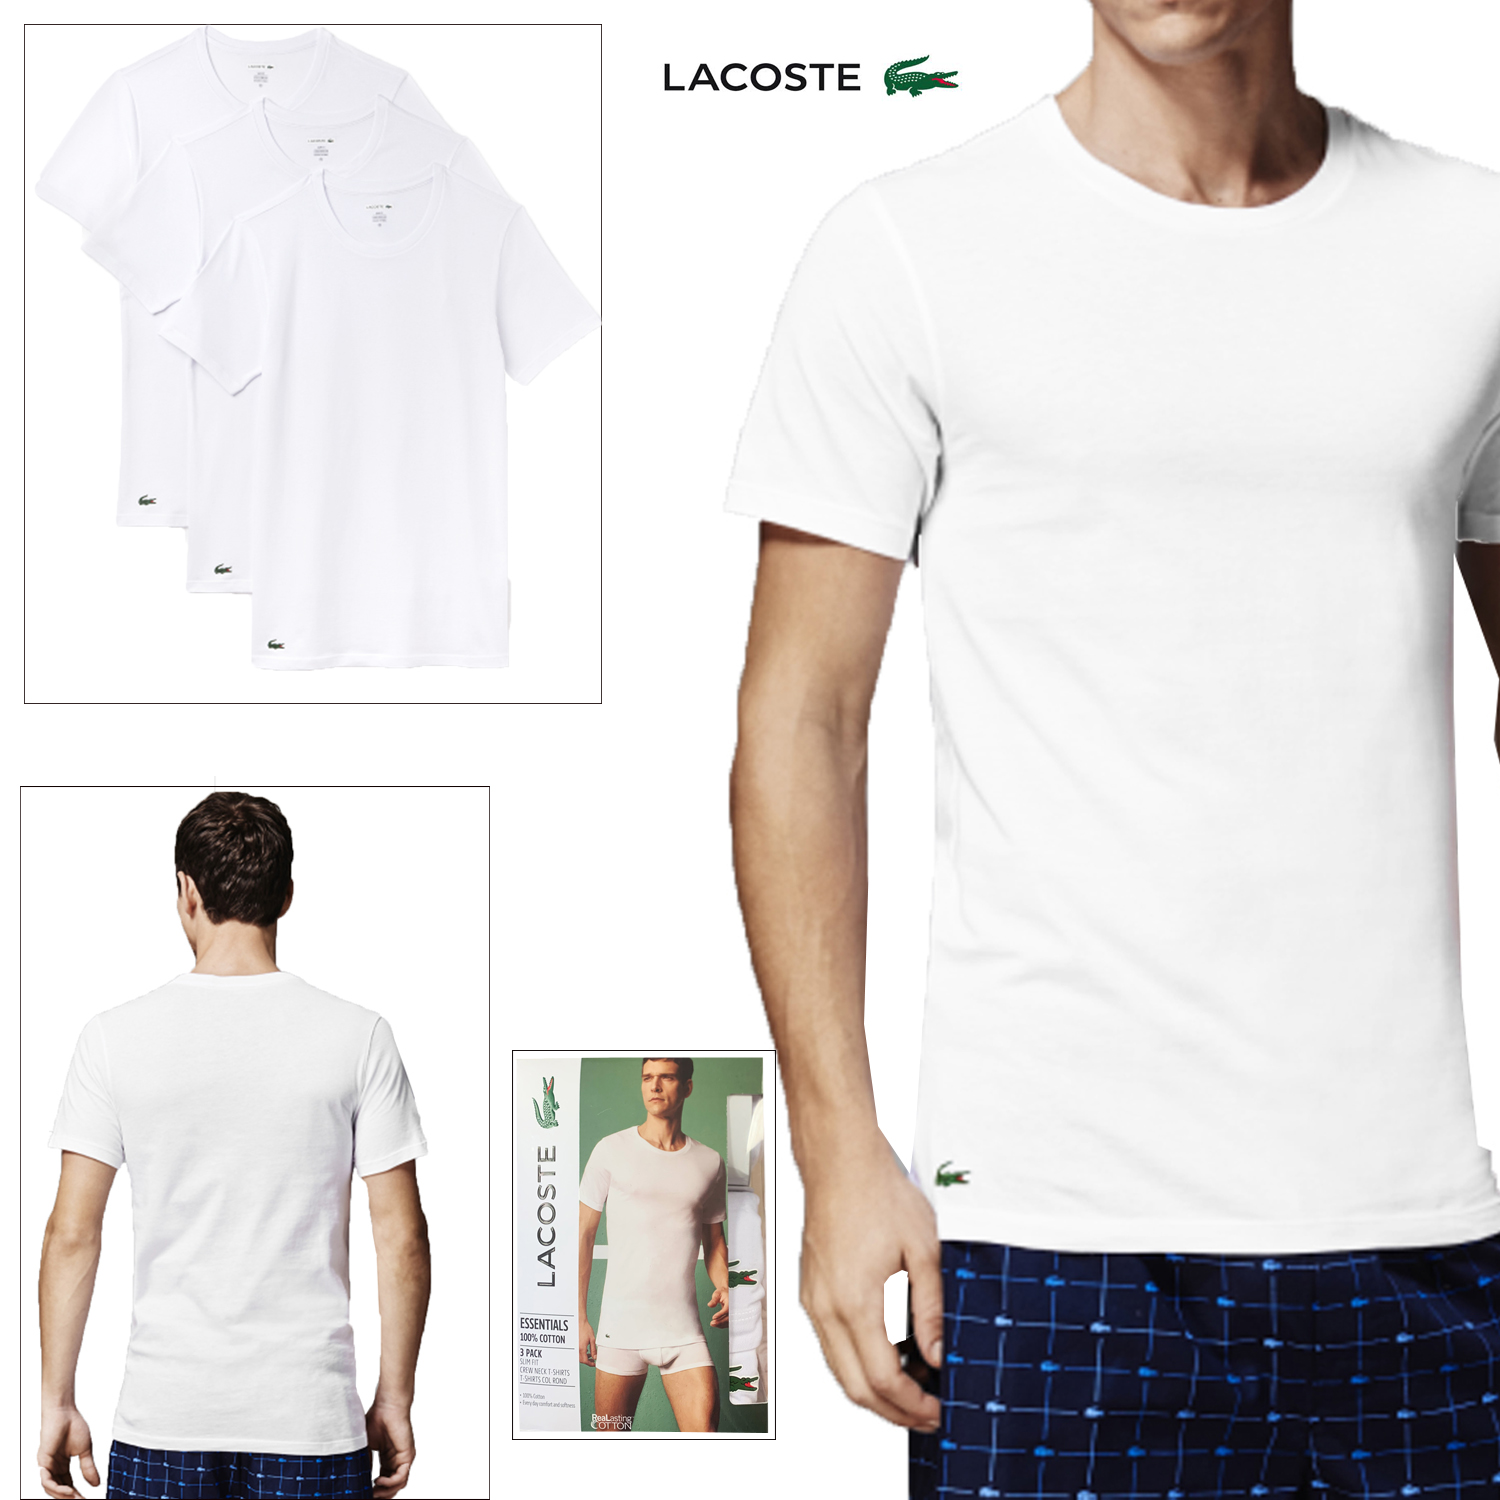 lacoste crew neck t shirt 3 pack